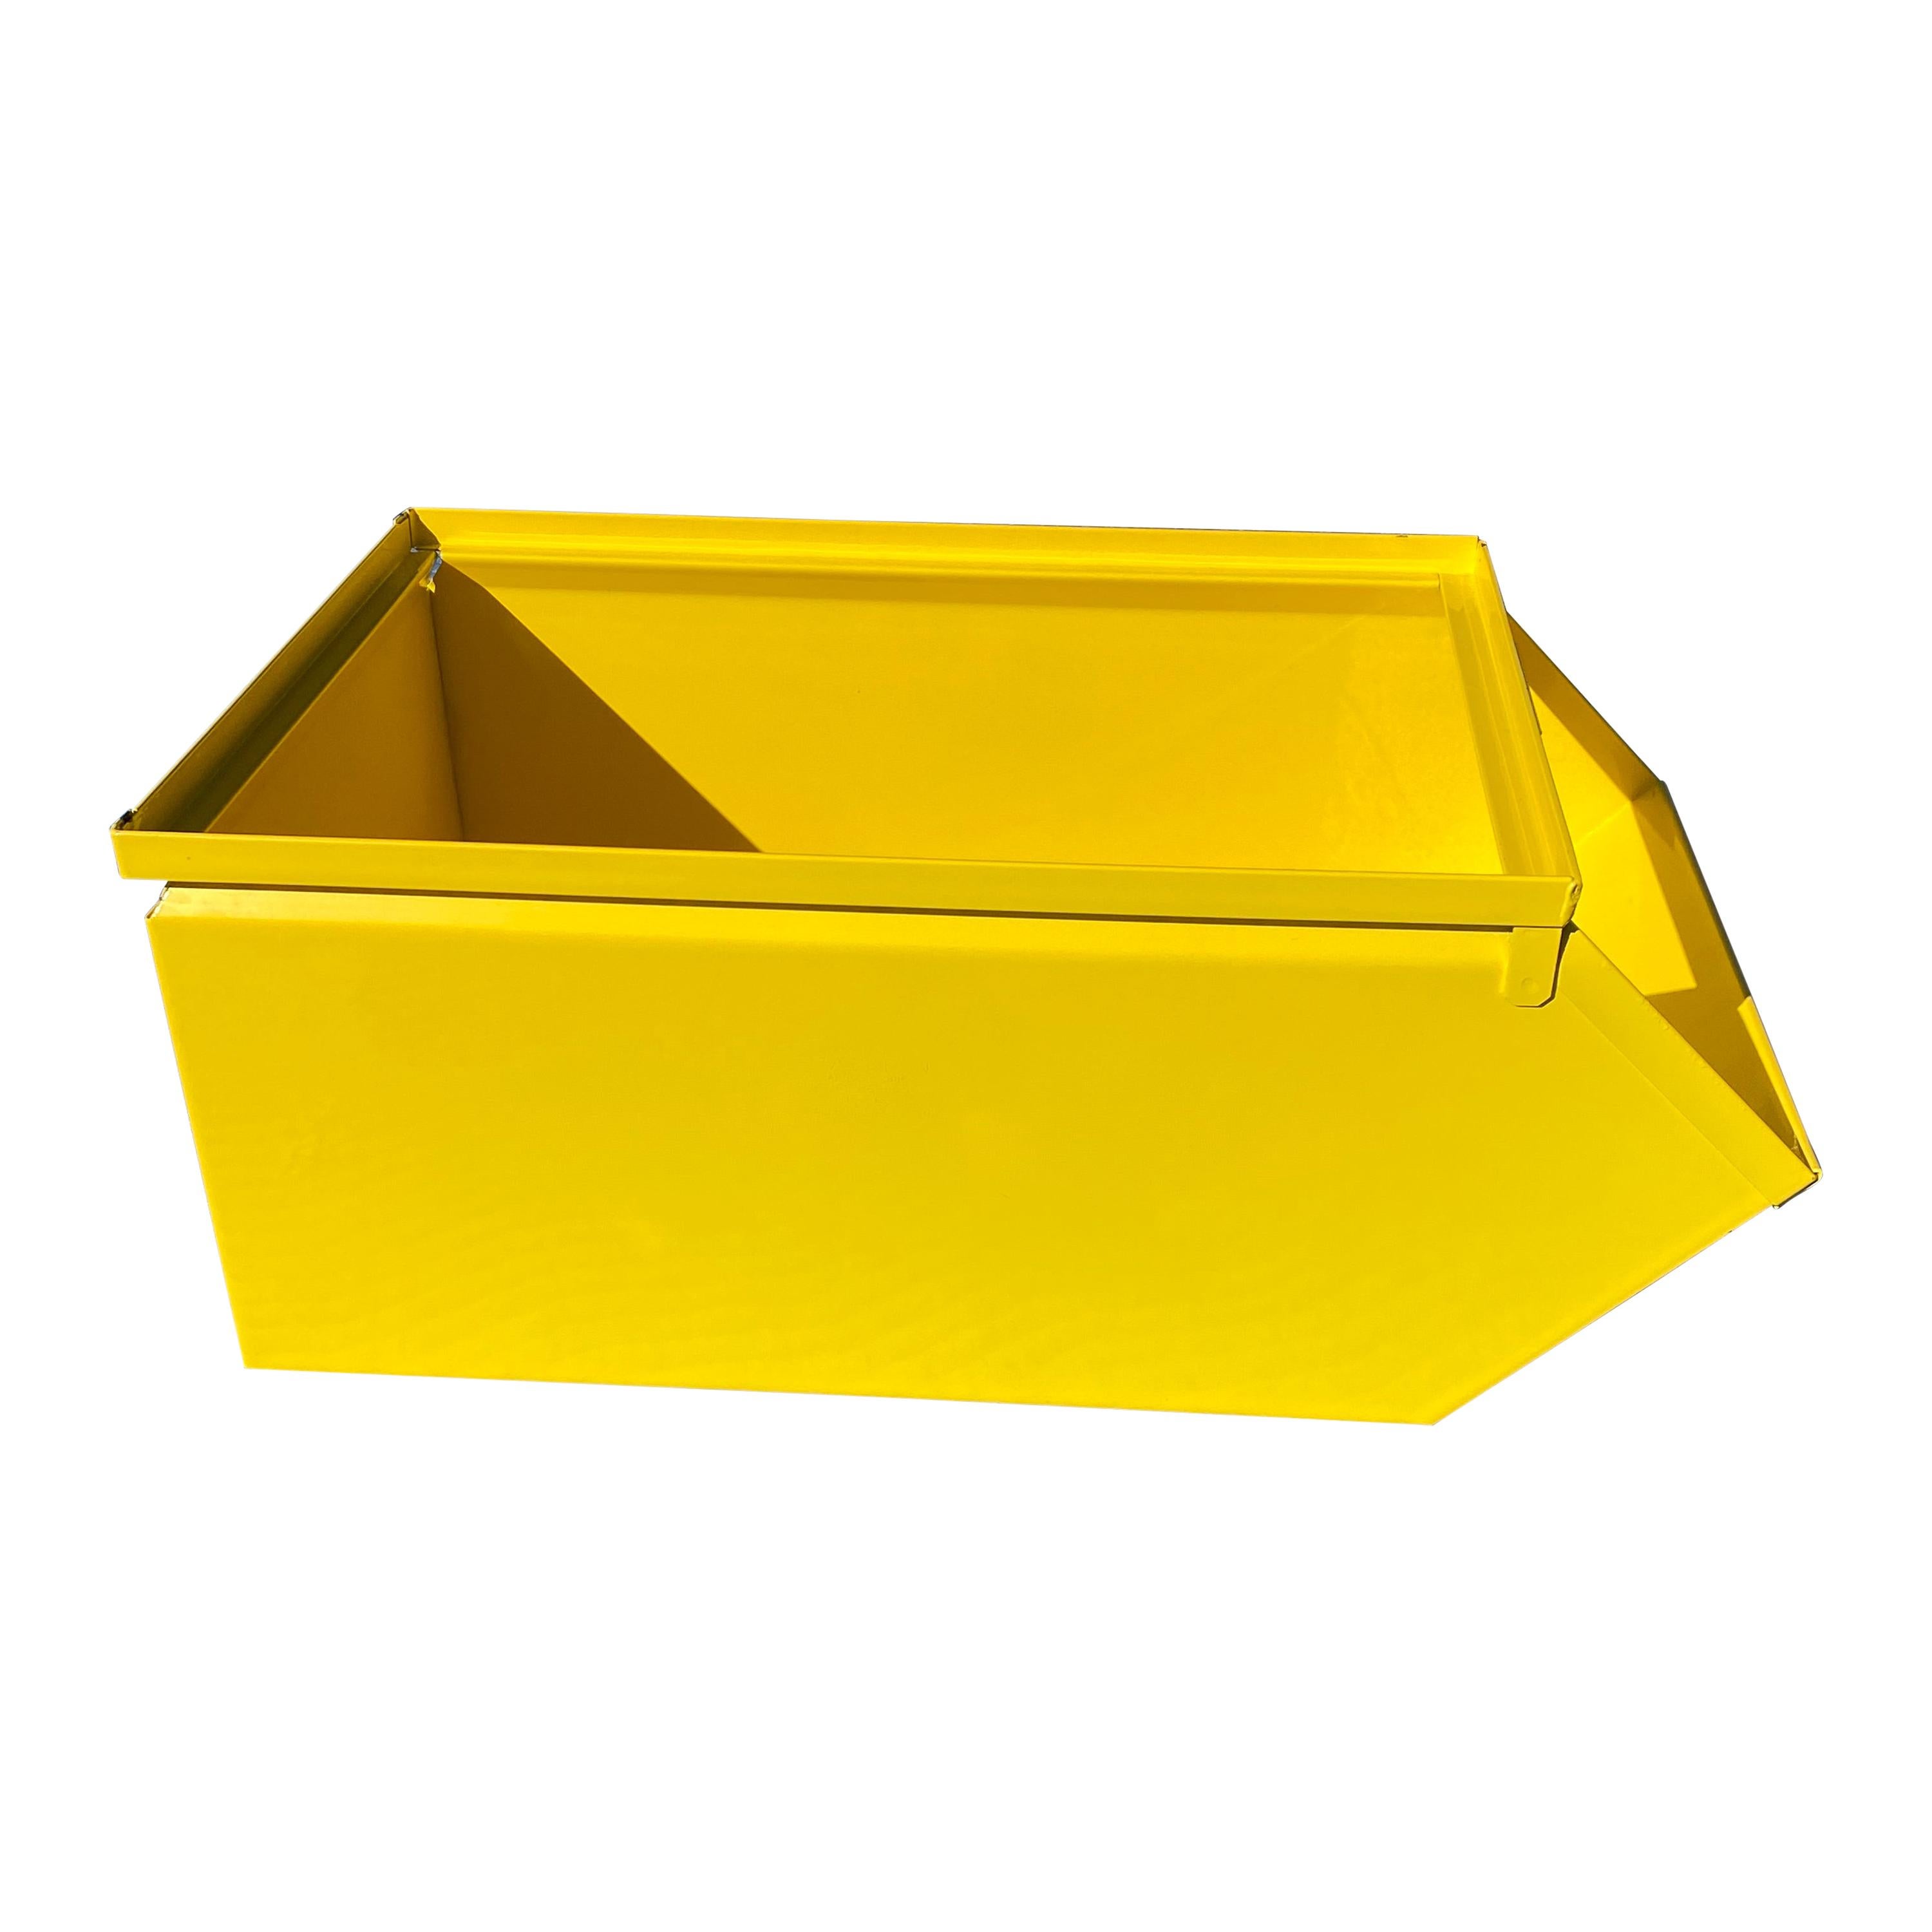 Collection Of Large Industrial Powder-Coated Sunshine Yellow Metal Bin Boxes